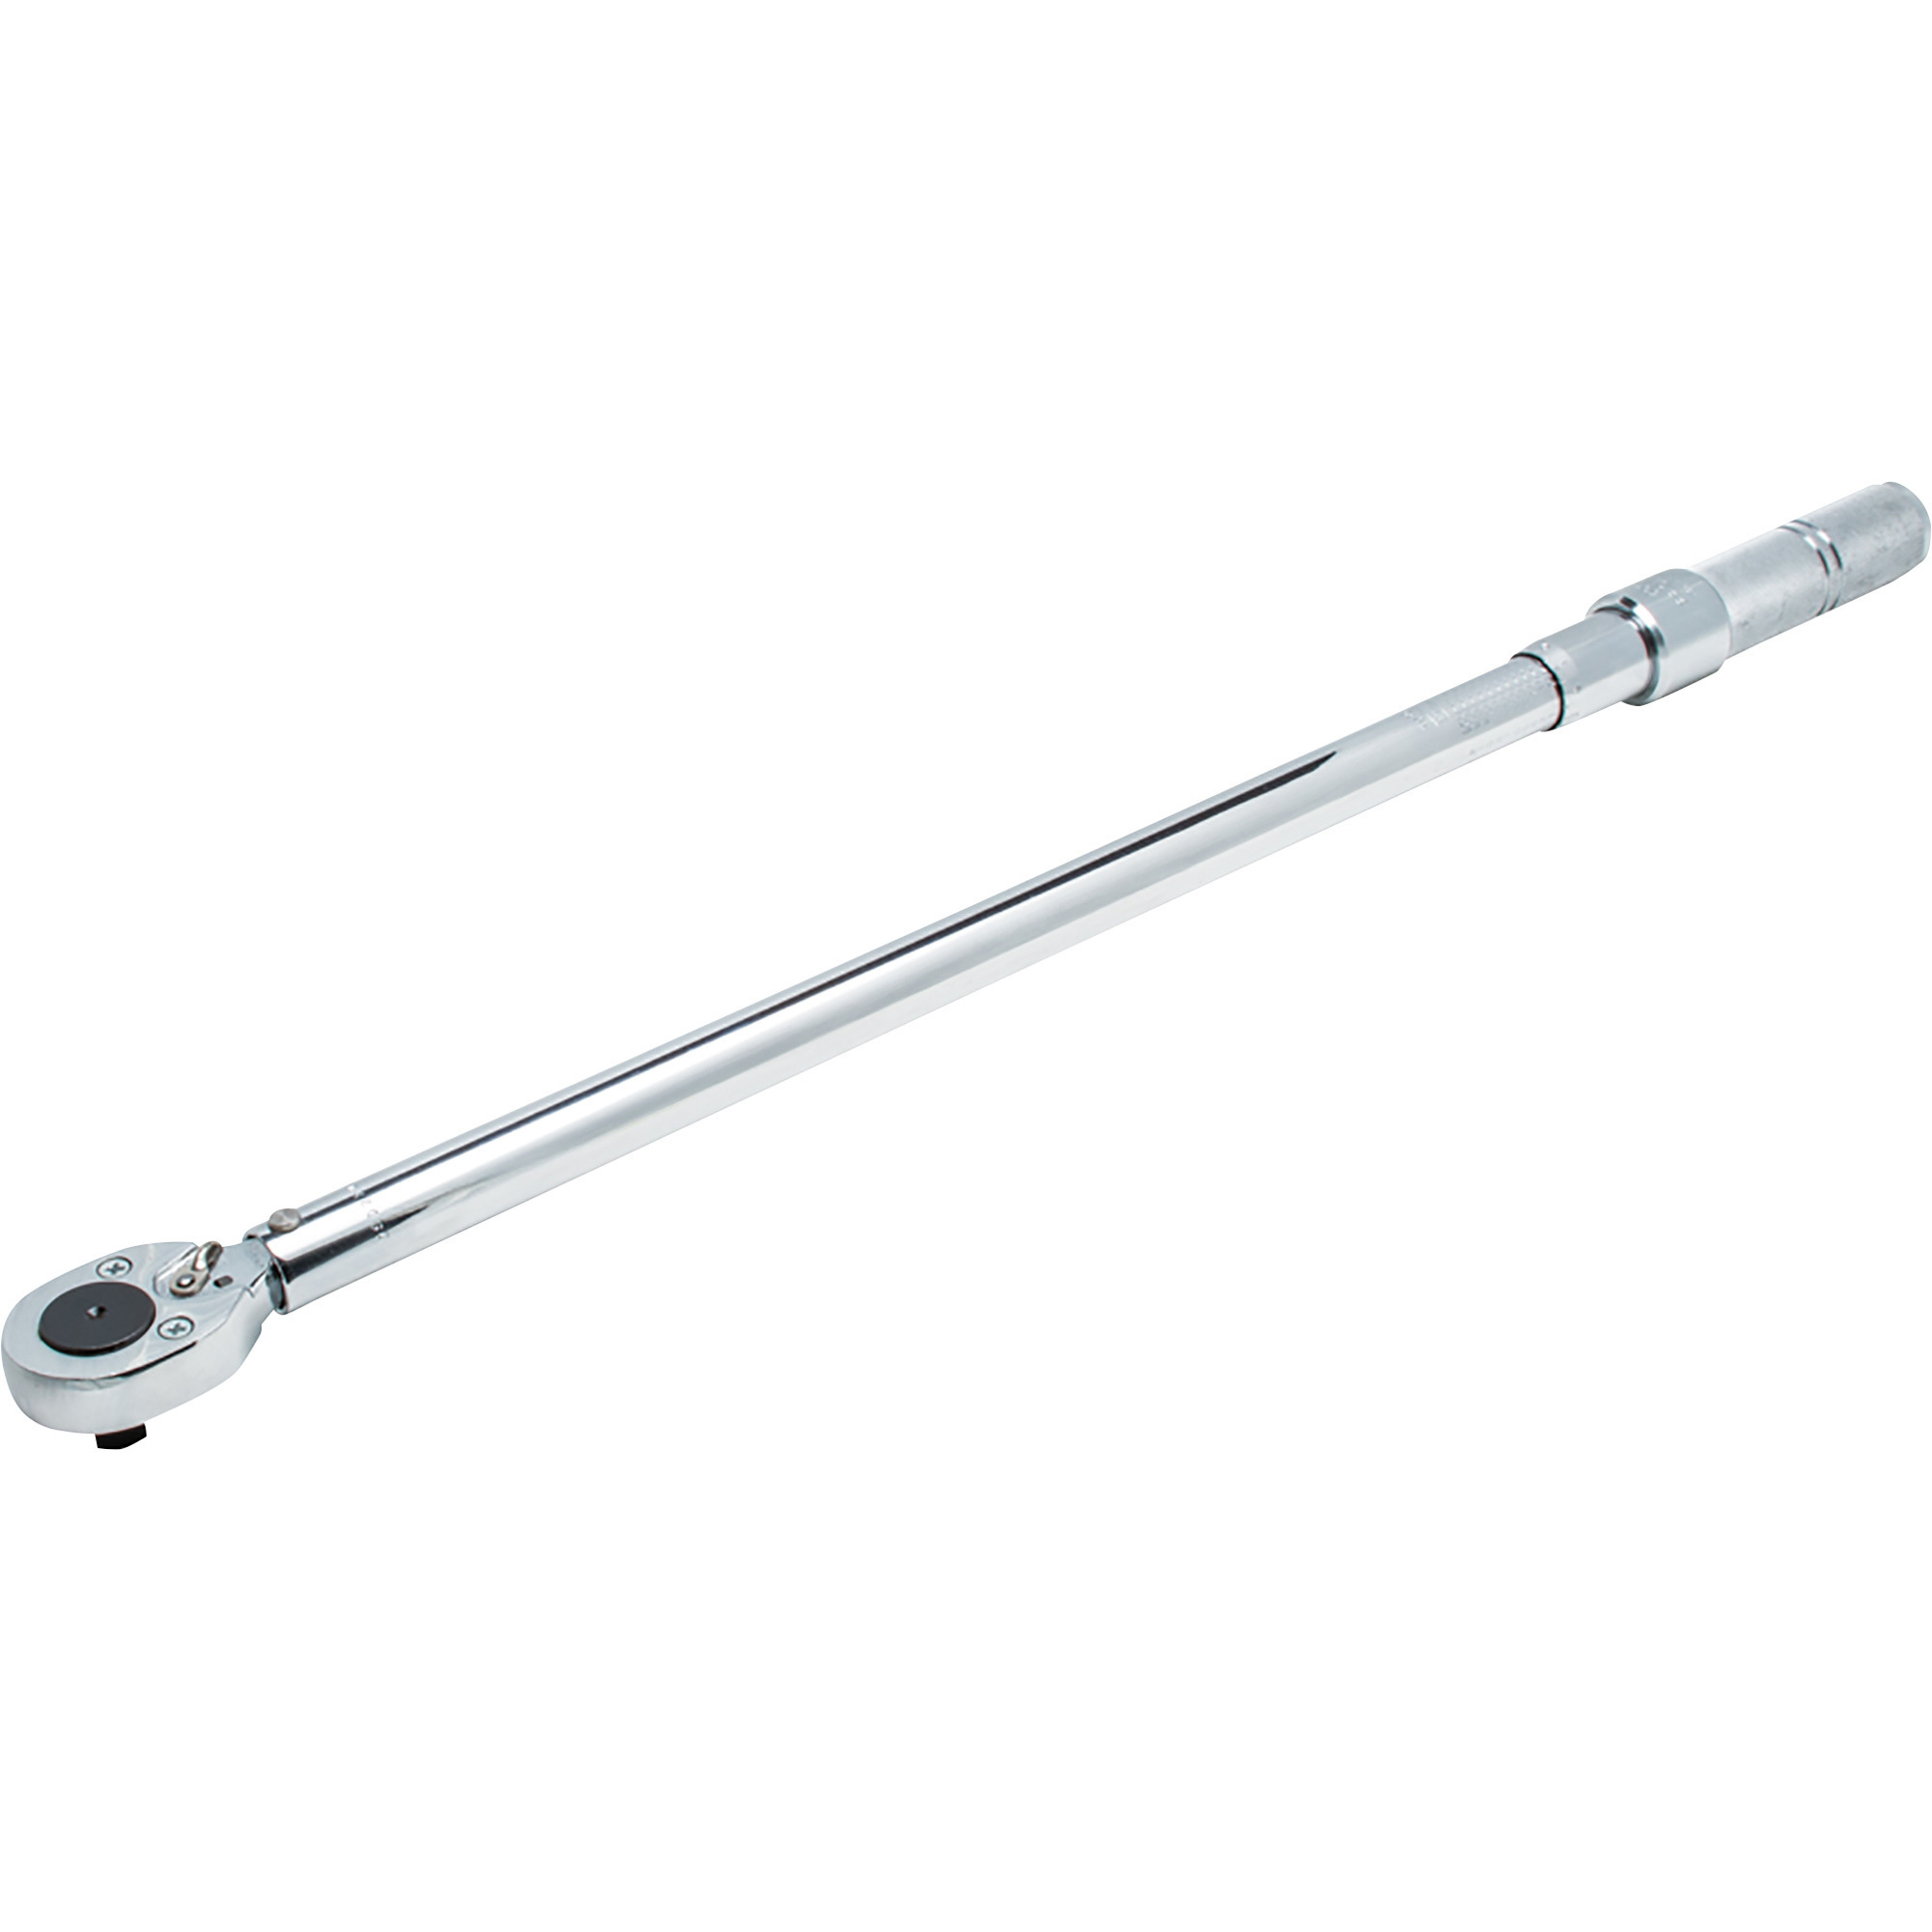 Proto Ratcheting Head Micrometer Torque Wrench, 1/2Inch Drive, 50-250 Ft.-Lbs., Model J6014C